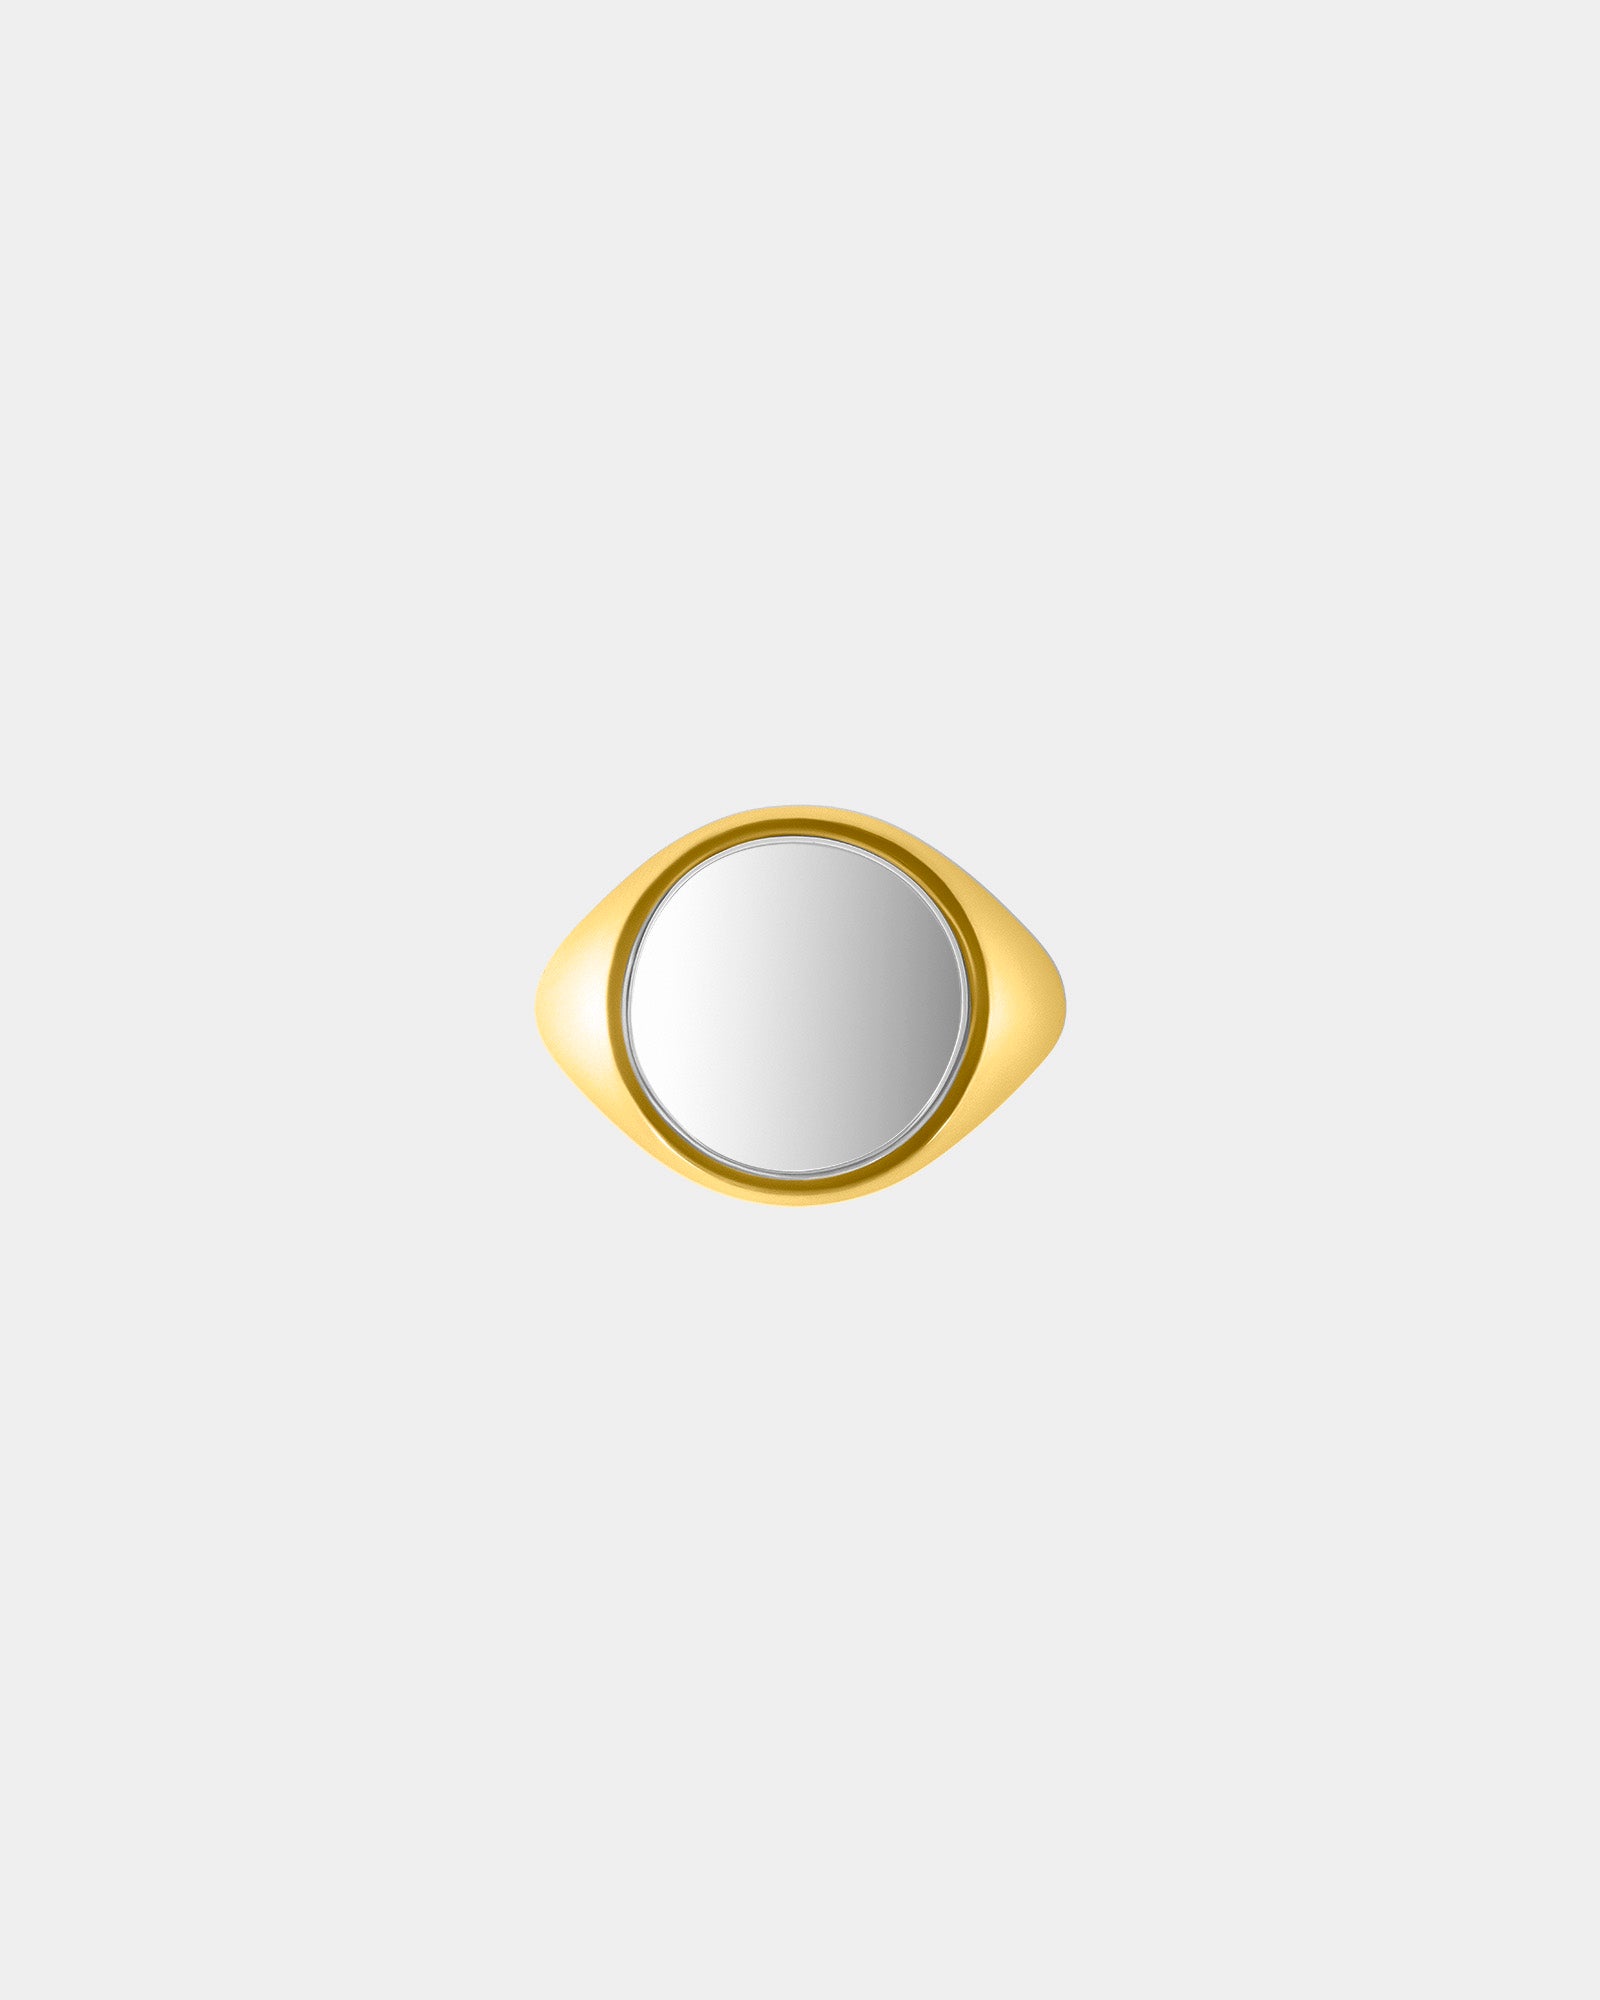 Large Round Signet Ring in 9k Yellow Gold / Sterling Silver by Wilson Grant